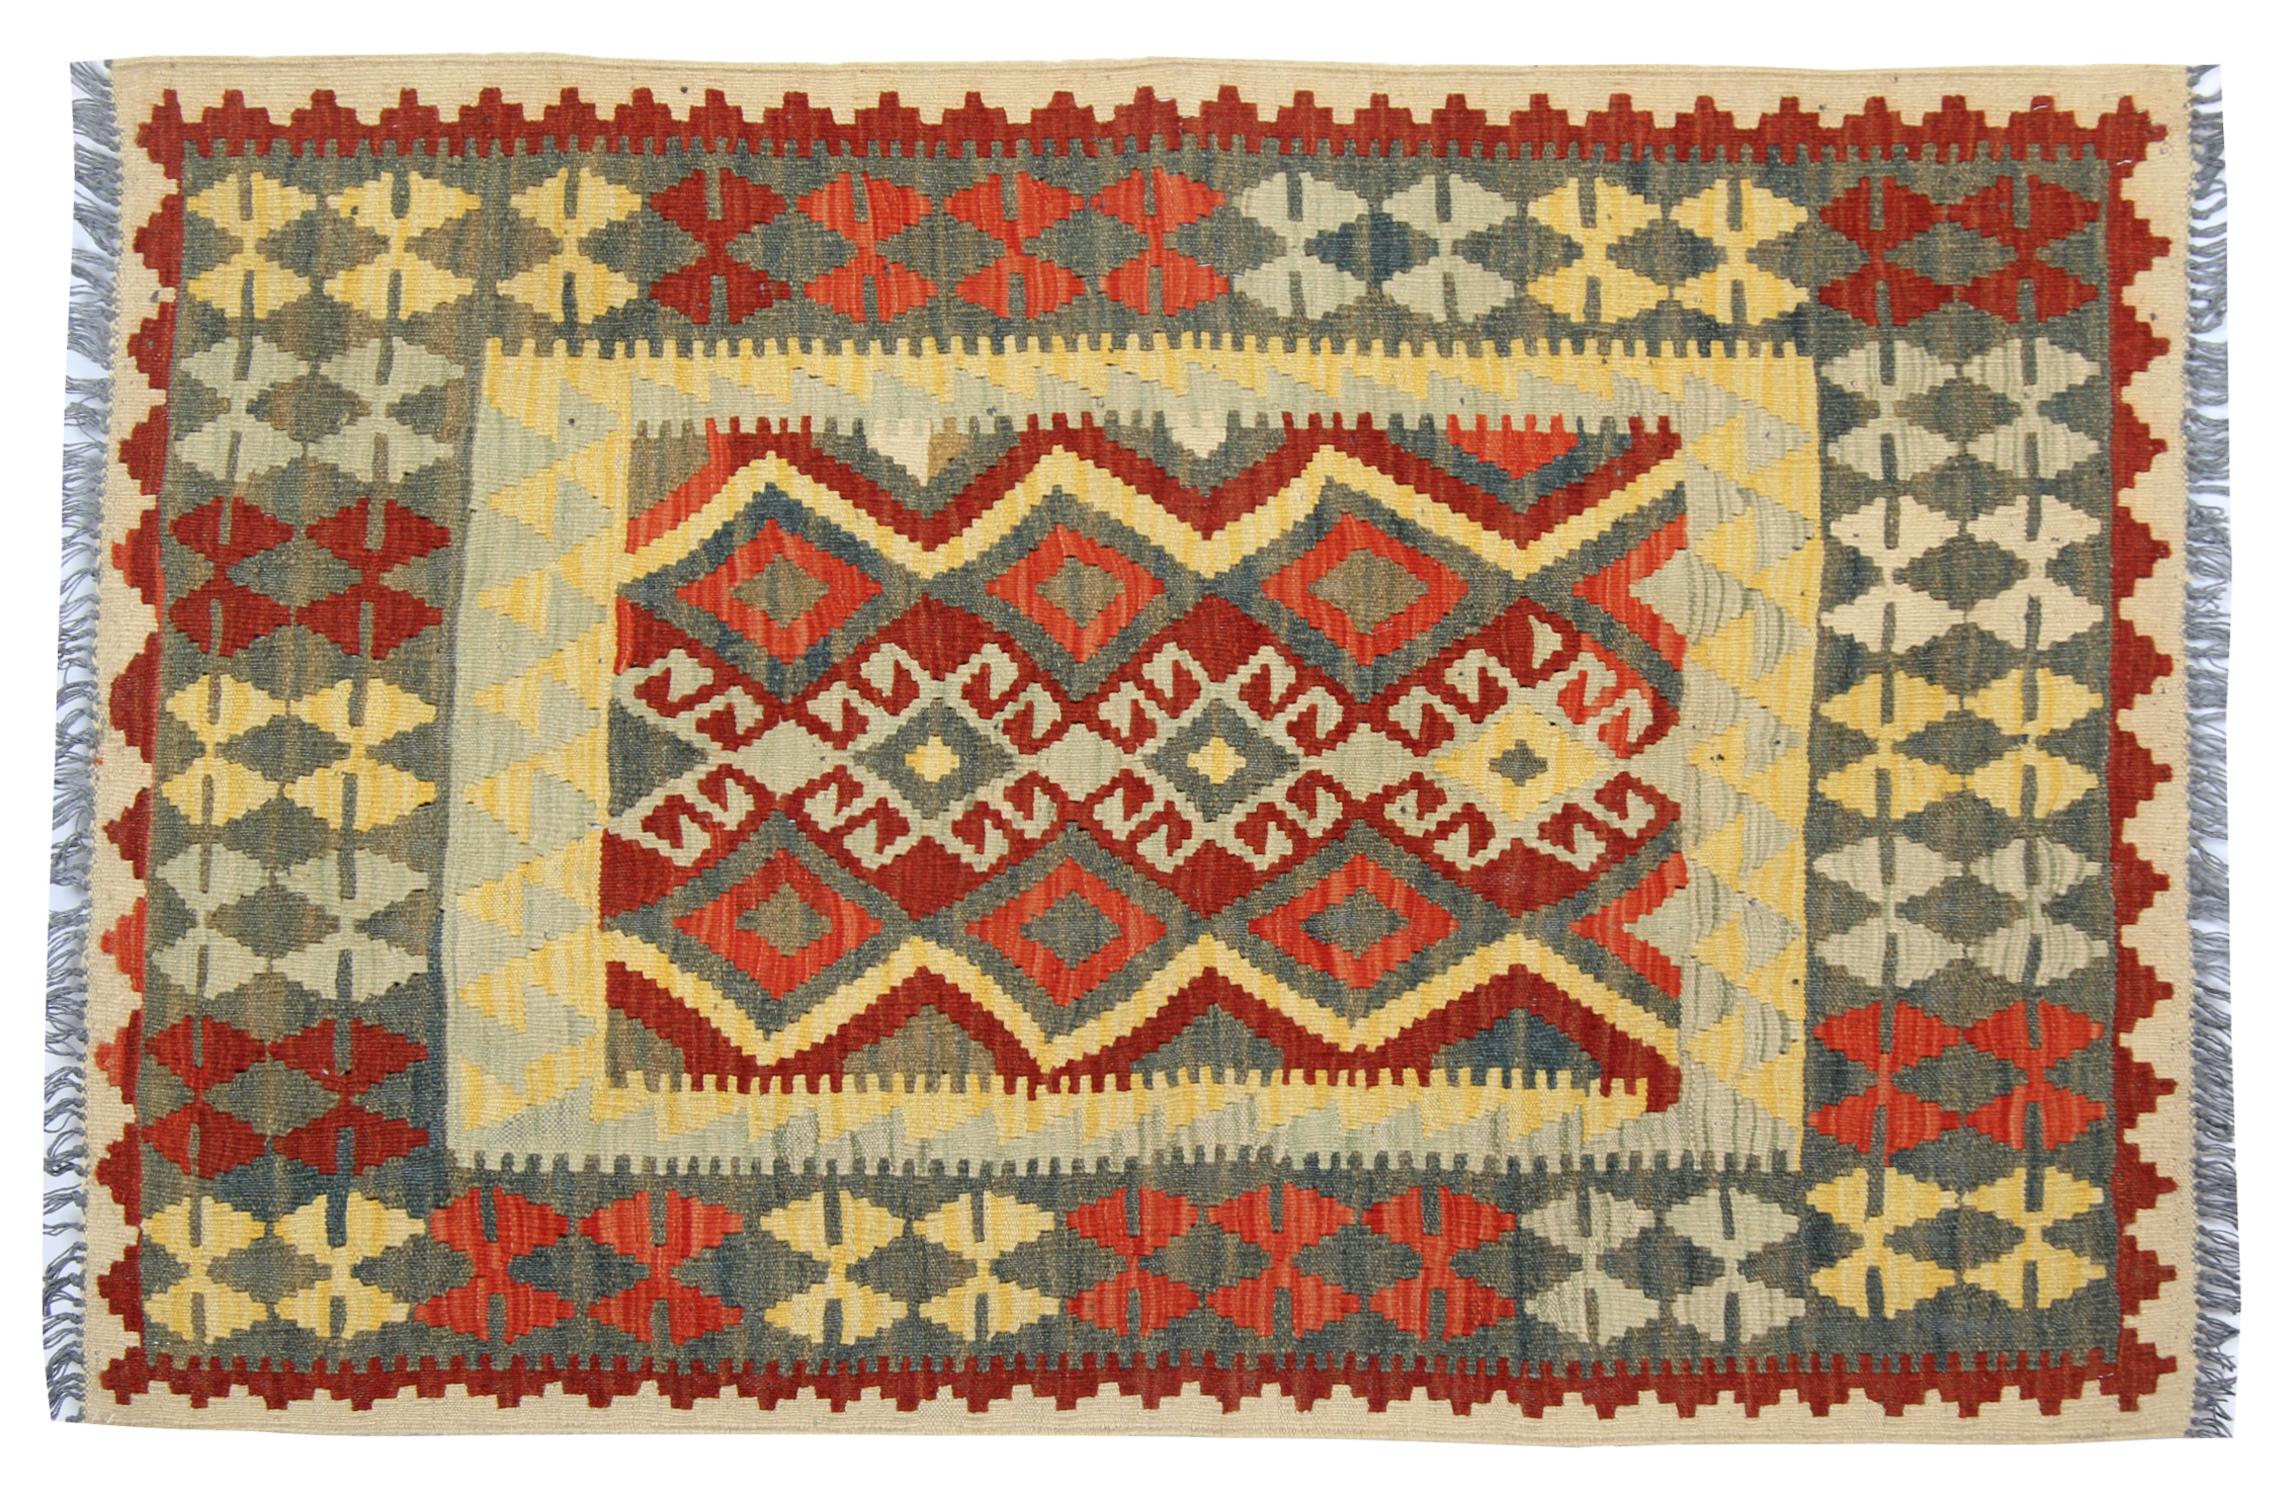 This elegant wool rug was woven by hand in the early 2000s in Afghanistan. The central design has been woven with a geometric, symmetrical pattern woven in accents of beige, red and green. Featuring tribal motifs throughout both the centre and